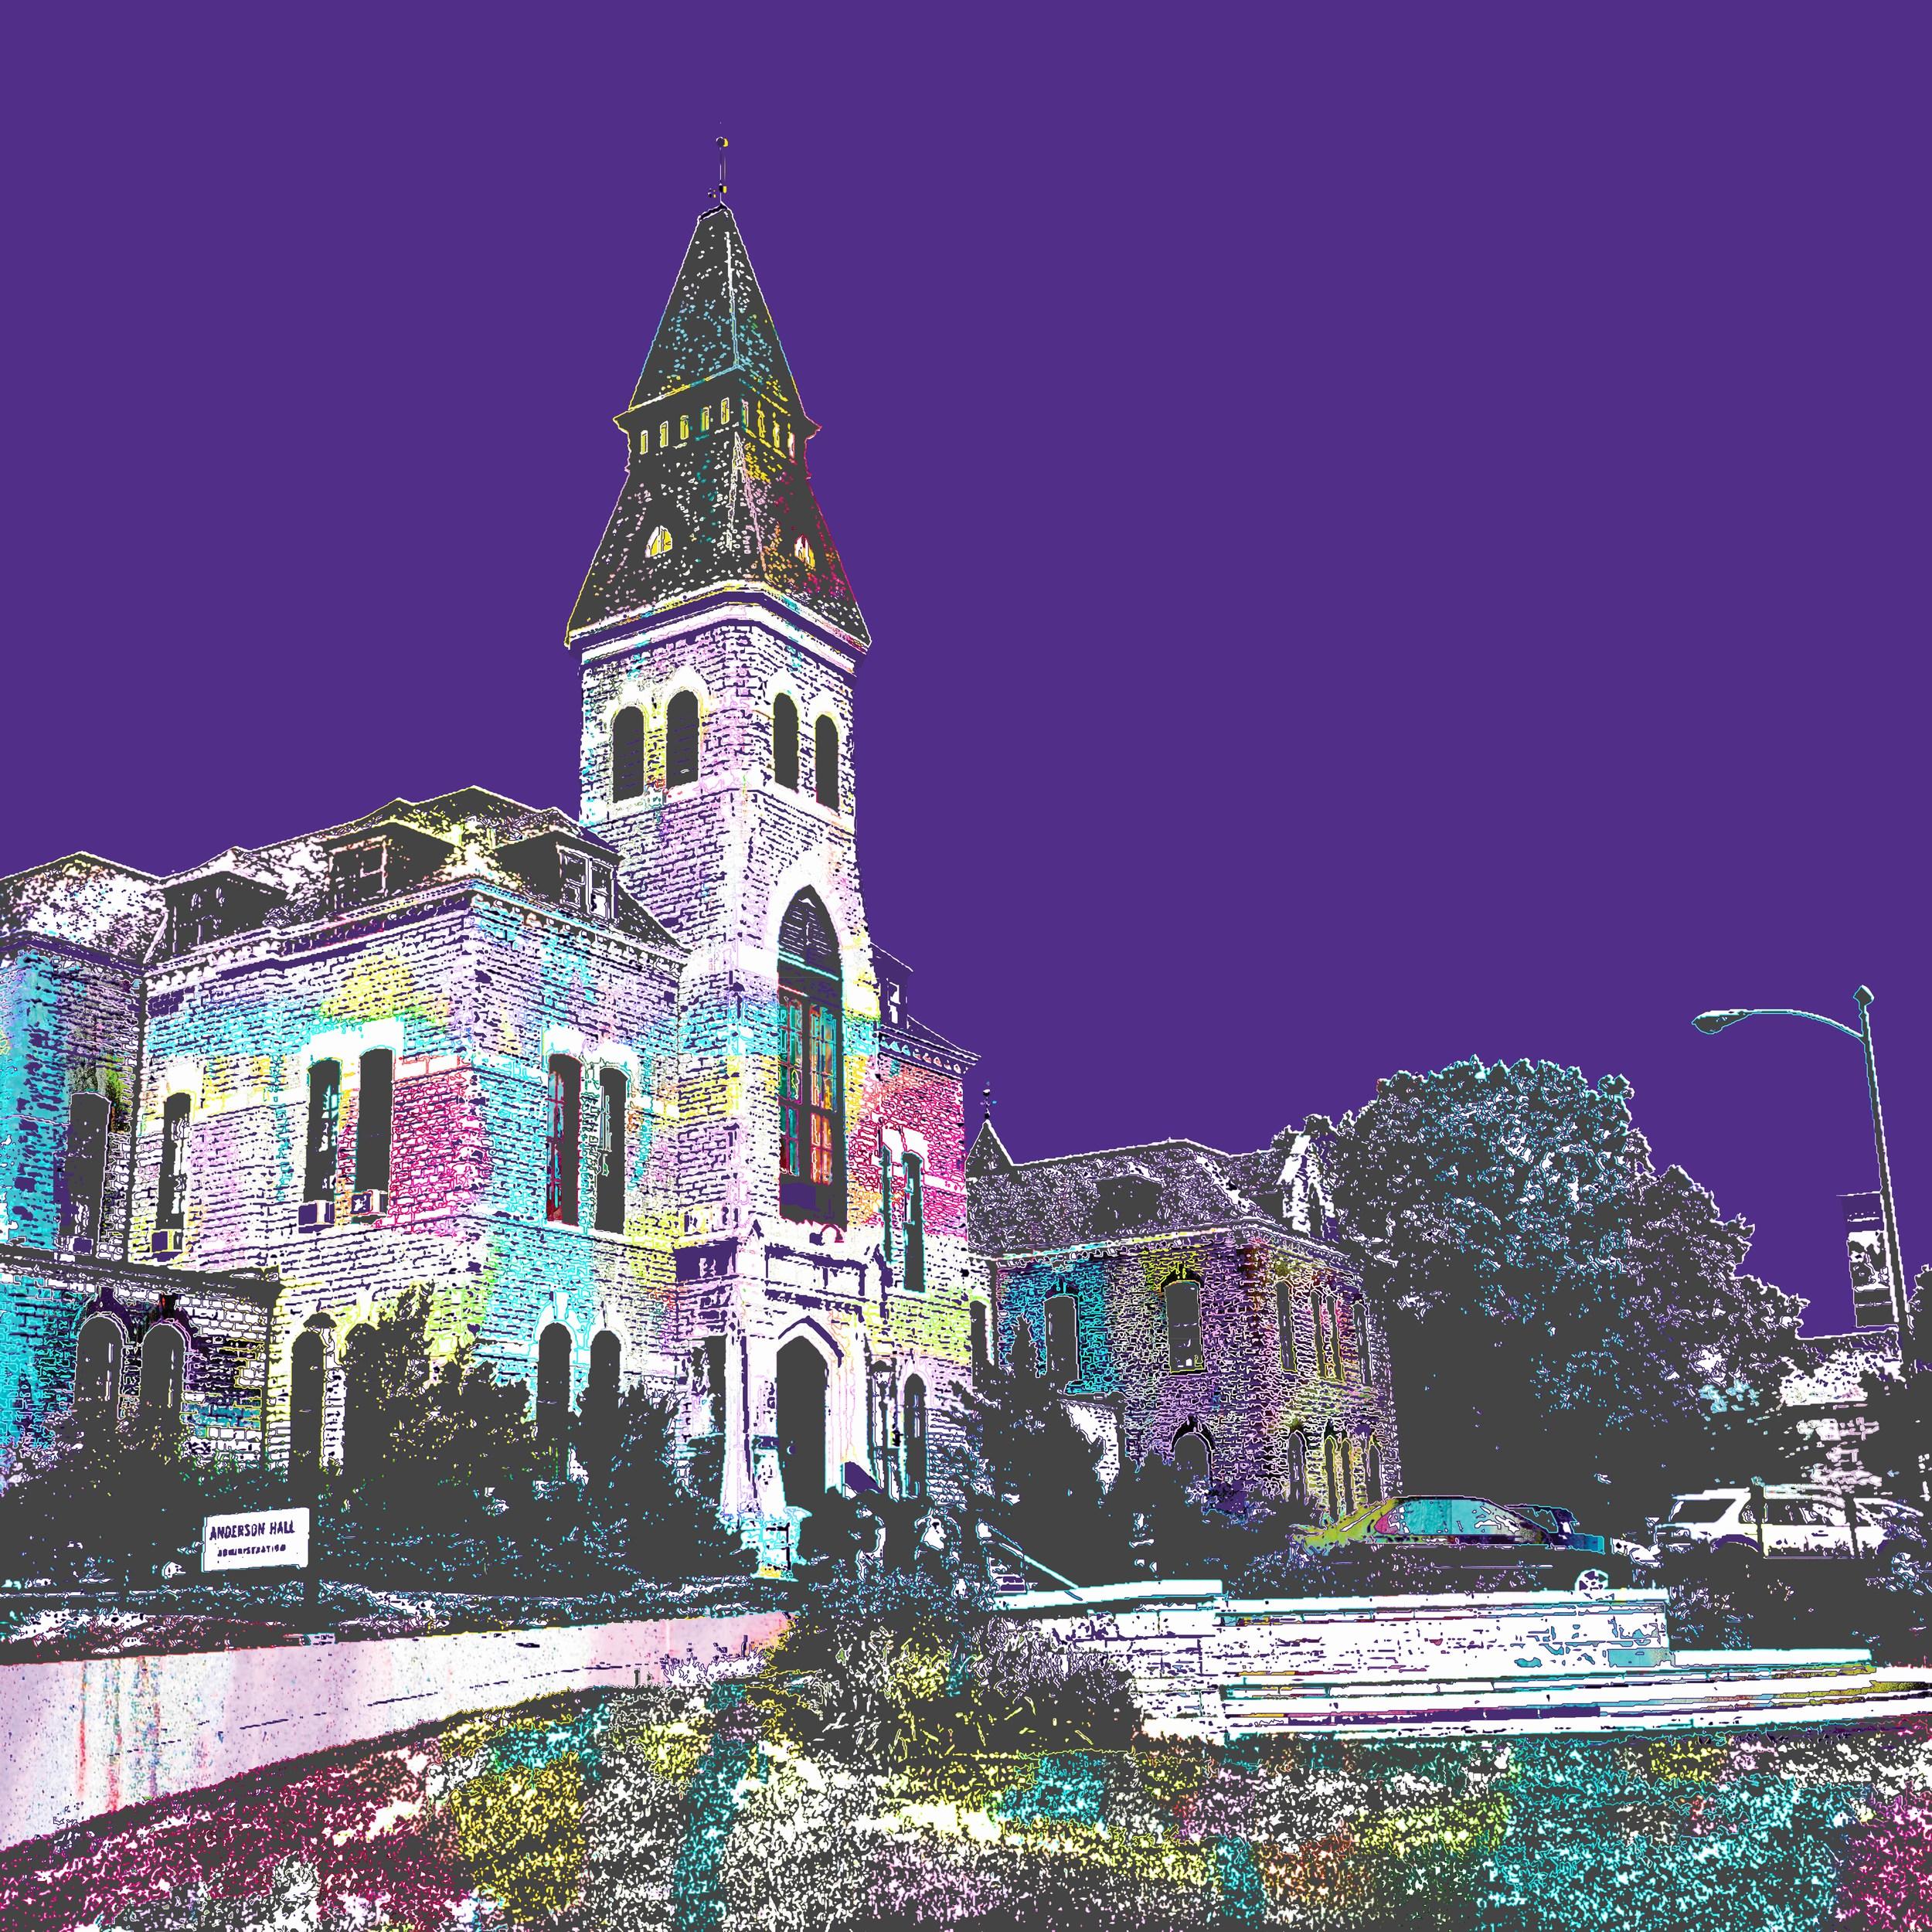 Katrina Revenaugh
“Anderson Hall at K-State”
Dye Sublimation Print on Aluminum, 2024
Size Options: 12 x 12 inches, 20 x 20 inches or 30 x 30 inches
Edition: 75 + AP
Signed and titled on label provided separately
COA included

Tags: